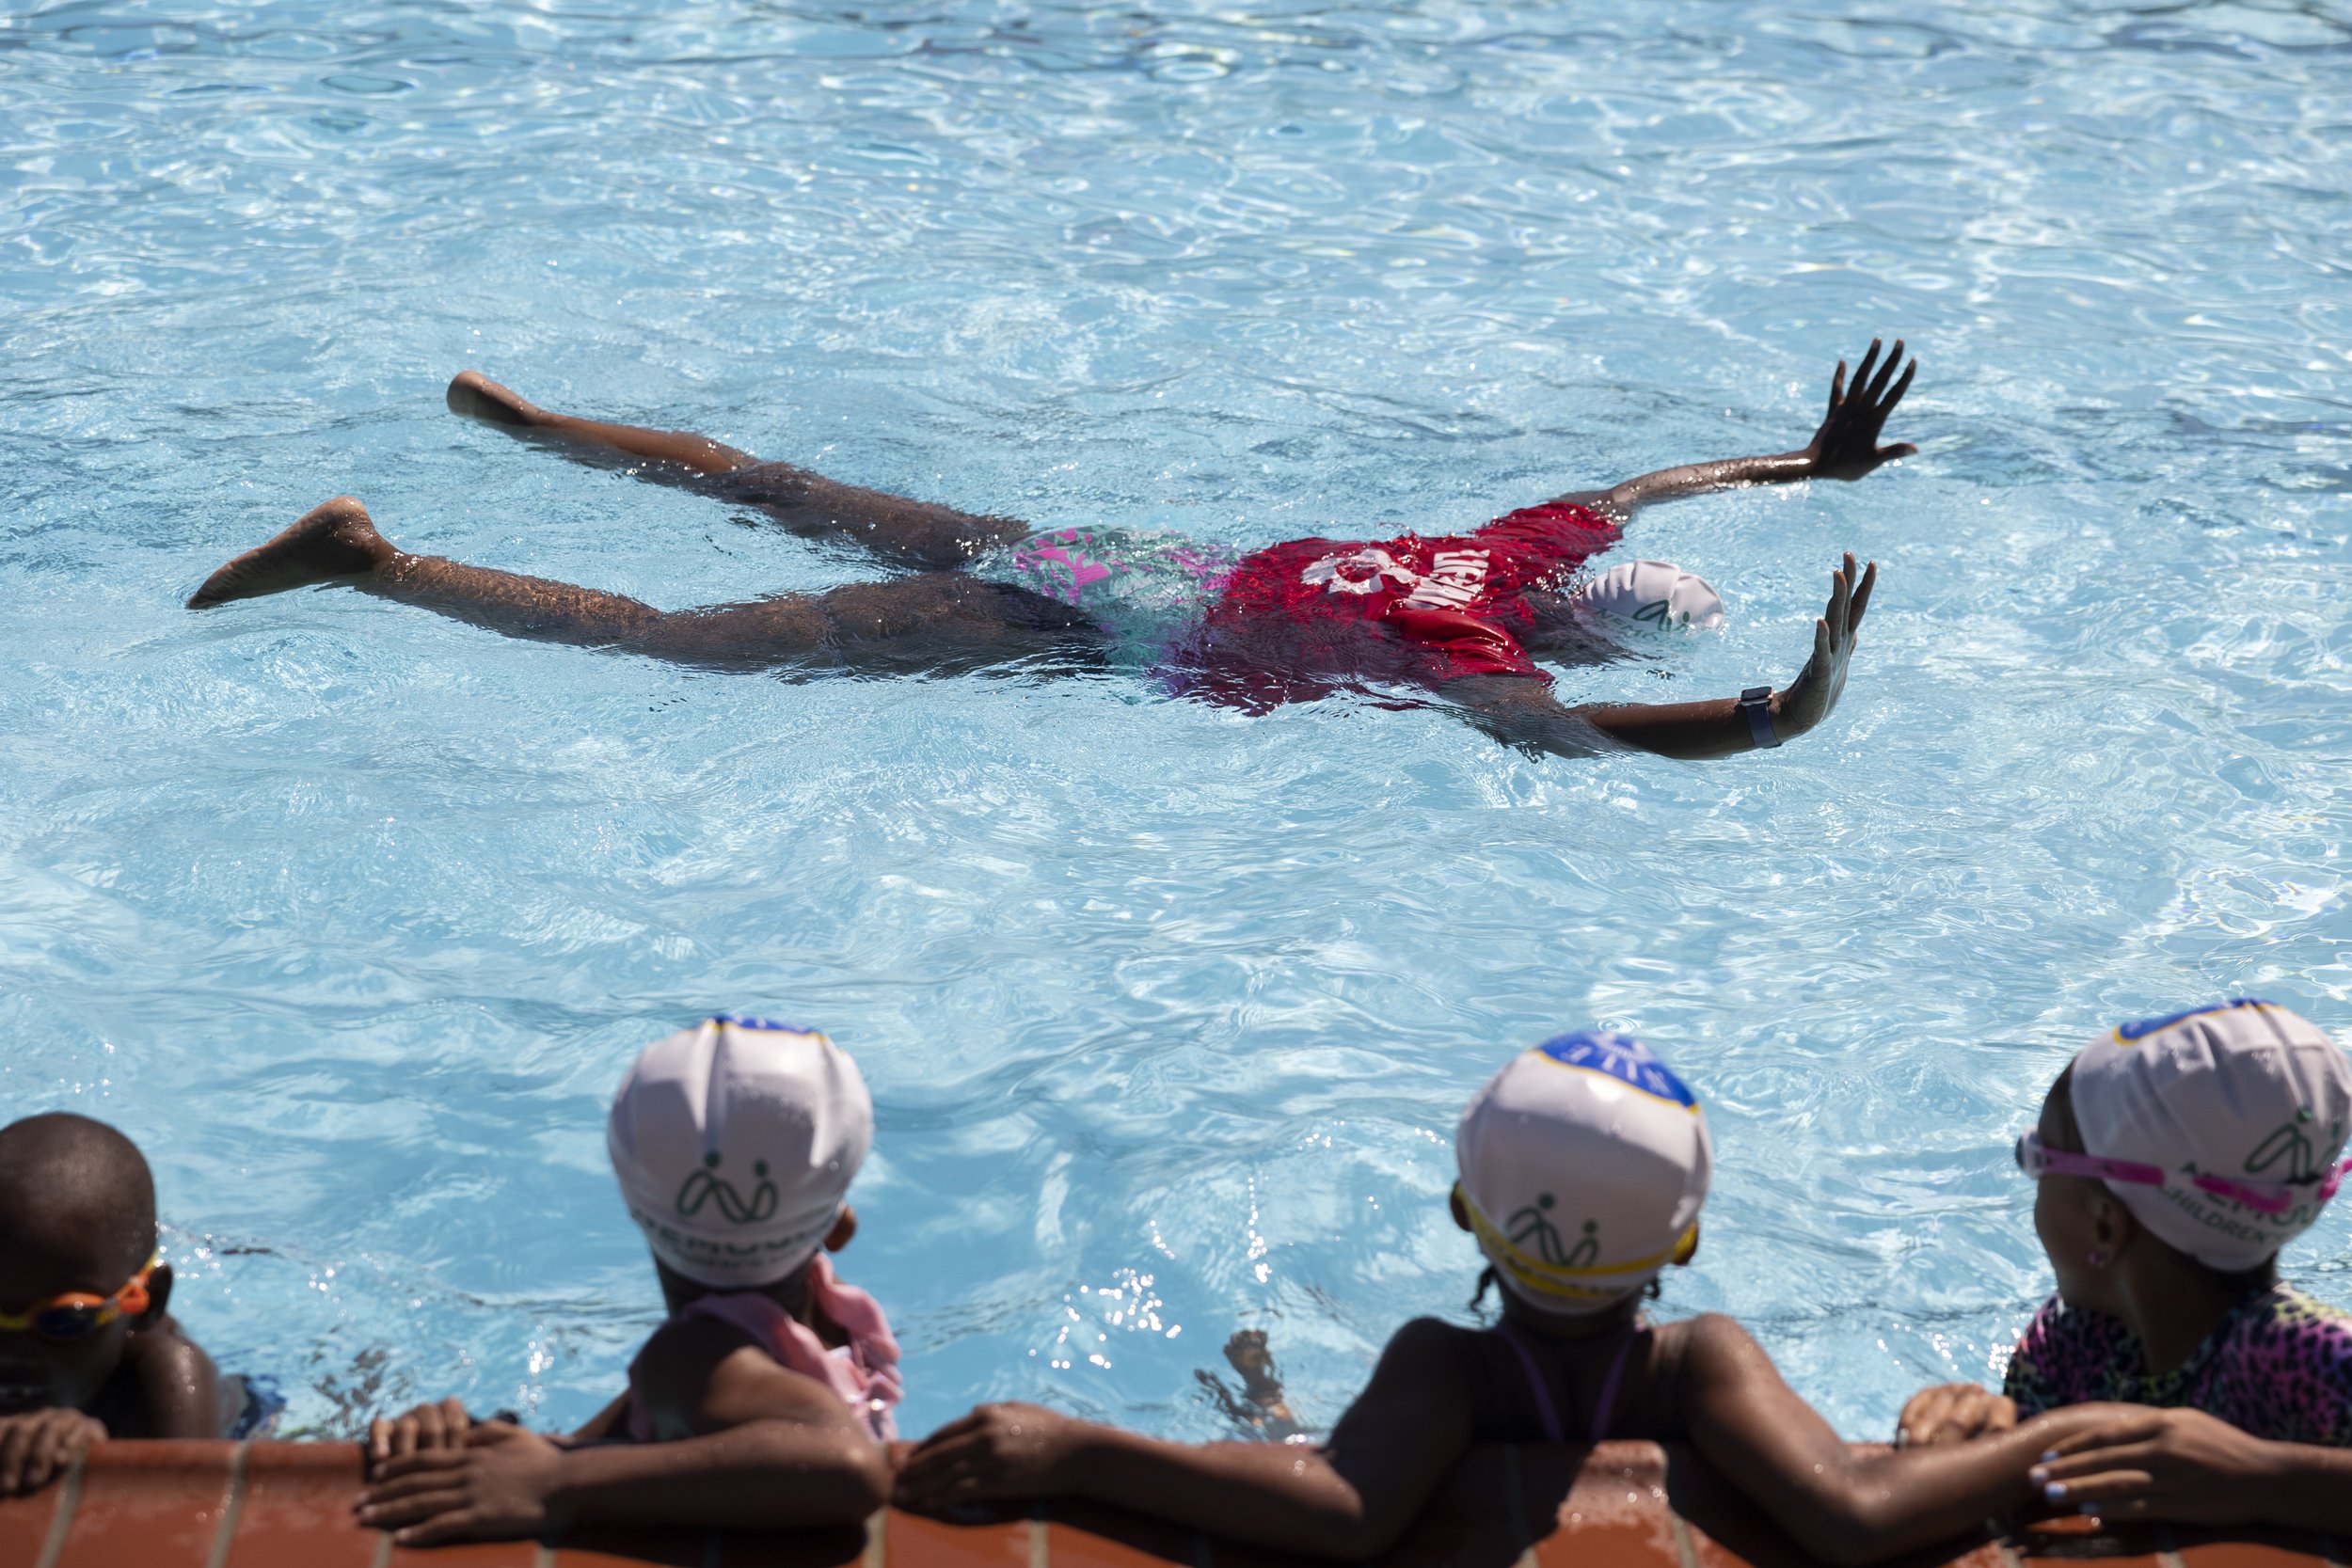  Lifeguard and swim instructor Tujuanna Jackson teaches children how to float and hold their breath under water at the free “No Child Will Drown In Our Town” program offered by Nile Swim Club in Yeadon, Pennsylvania on June 29, 2022. (On assignment f